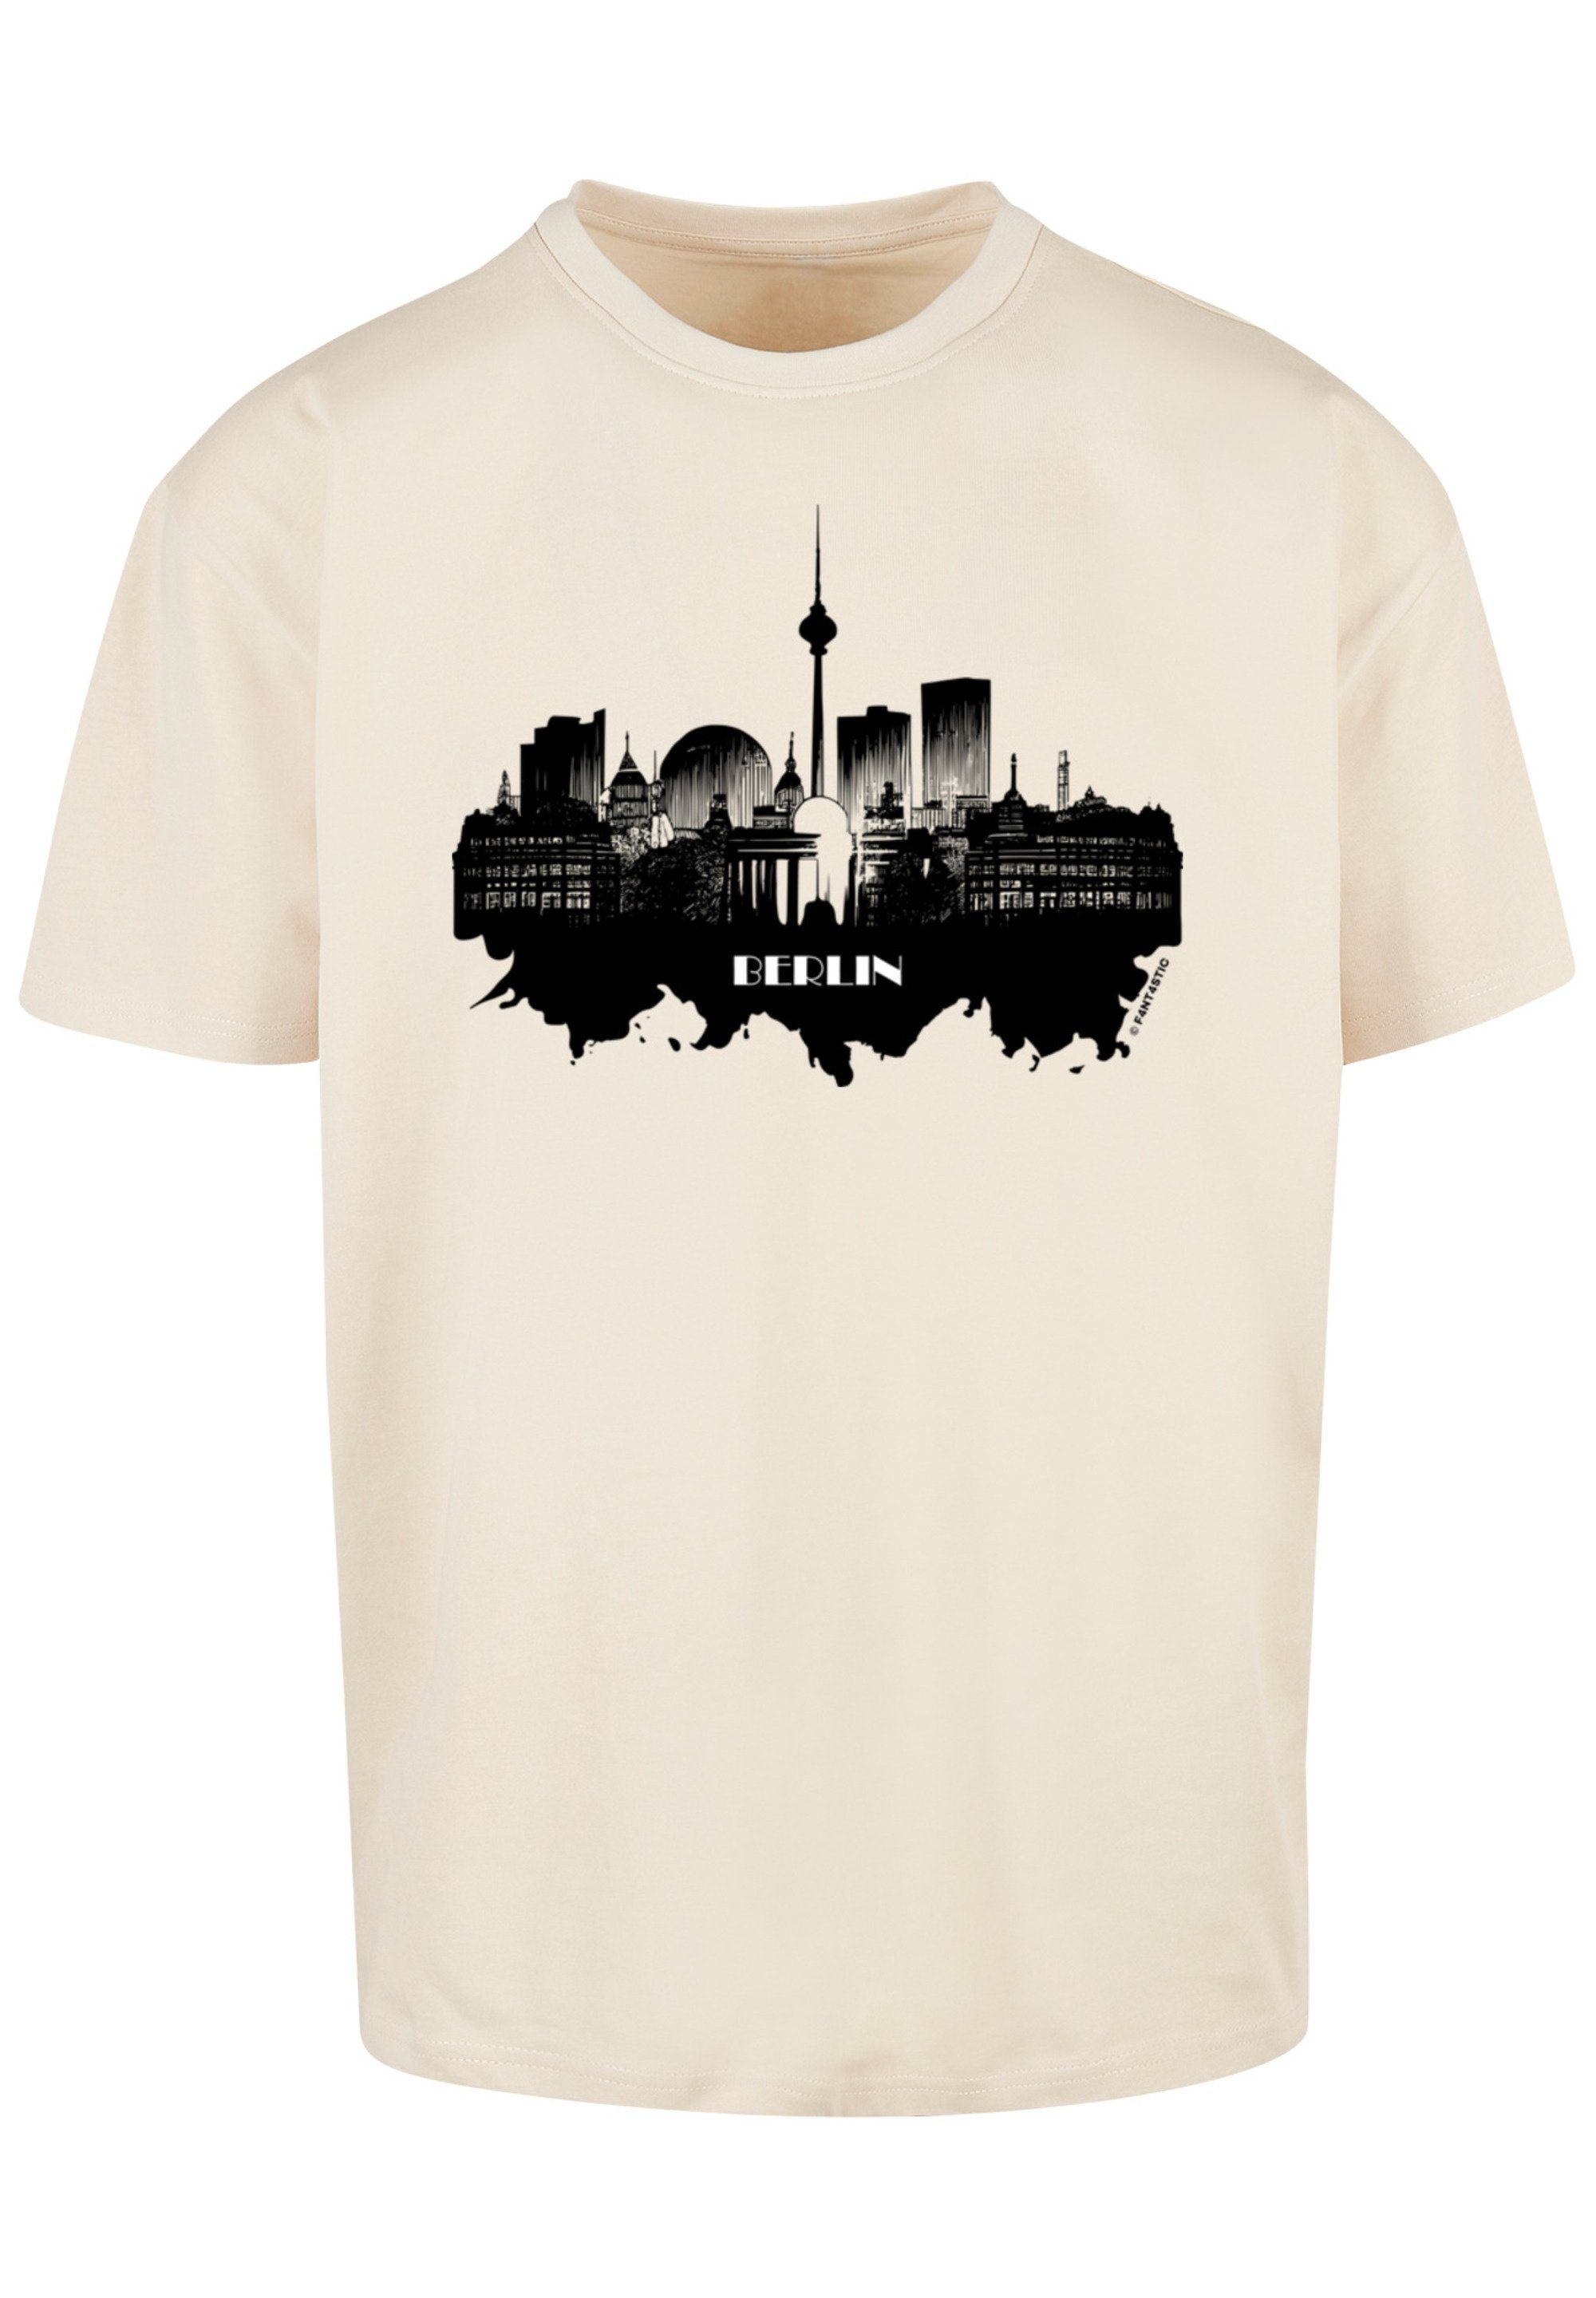 Collection - T-Shirt sand Berlin skyline F4NT4STIC Print Cities